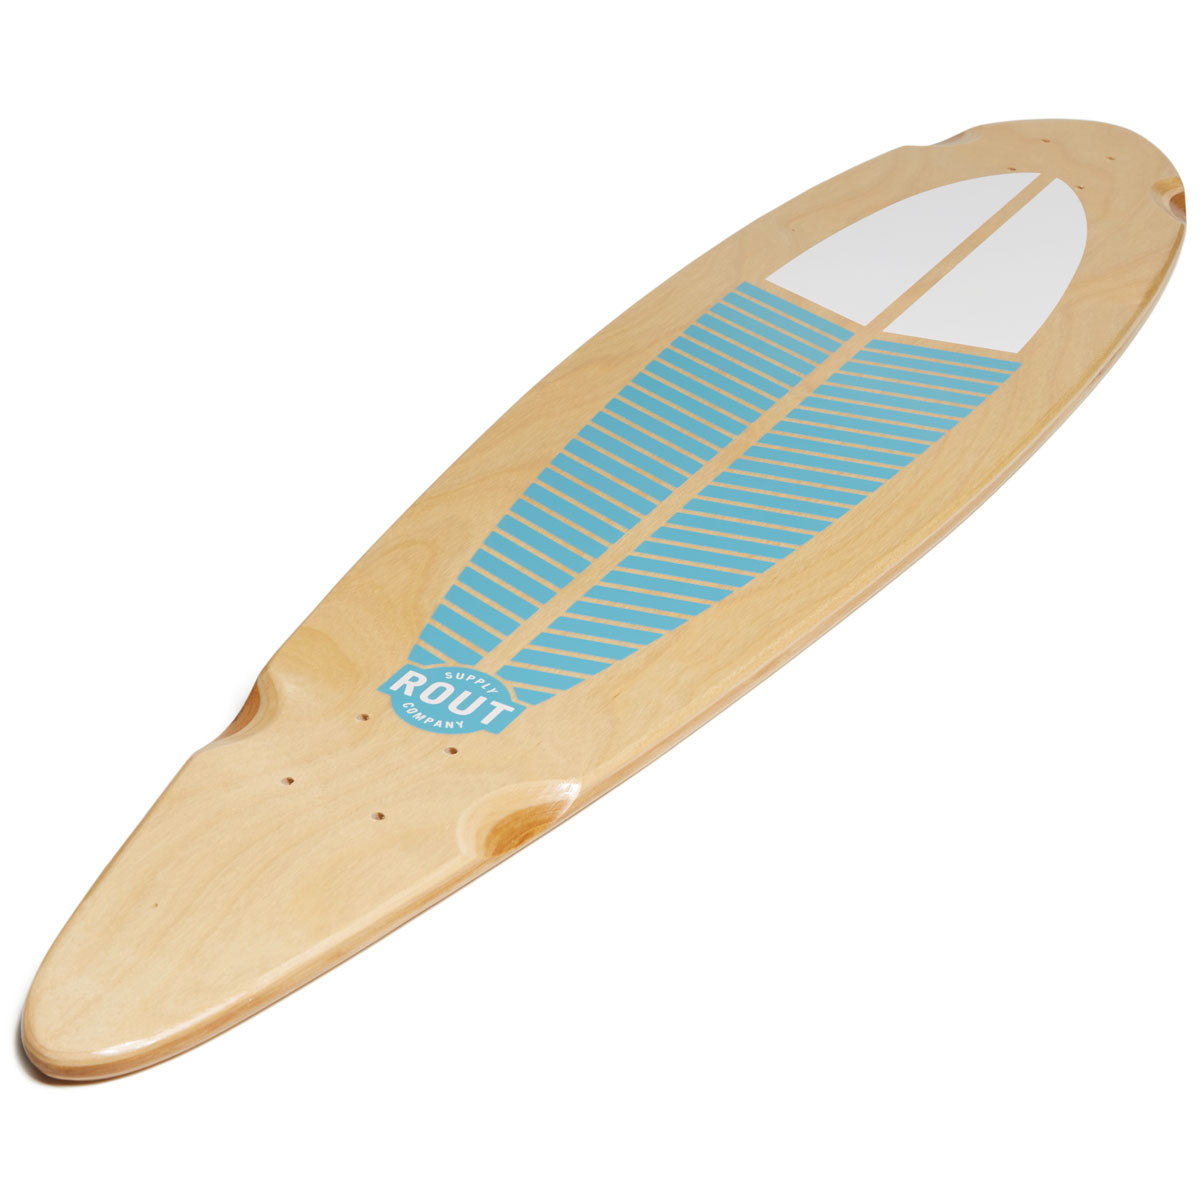 Rout Plume Pintail Longboard Complete image 4